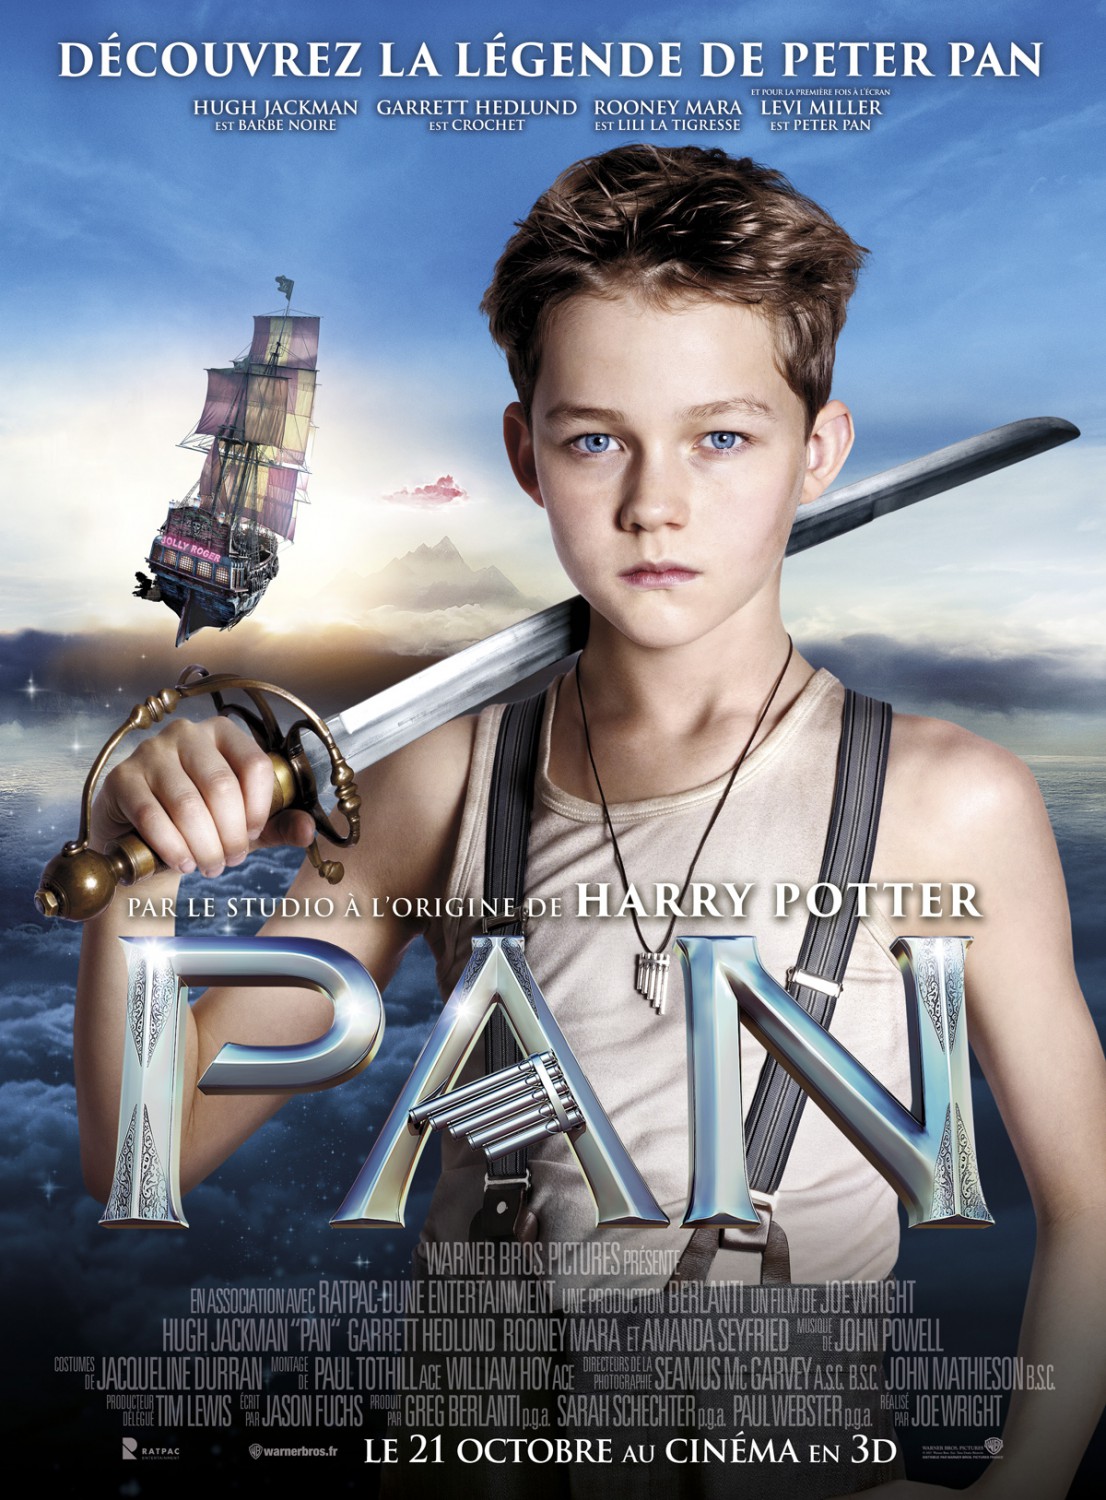 Extra Large Movie Poster Image for Pan (#18 of 18)